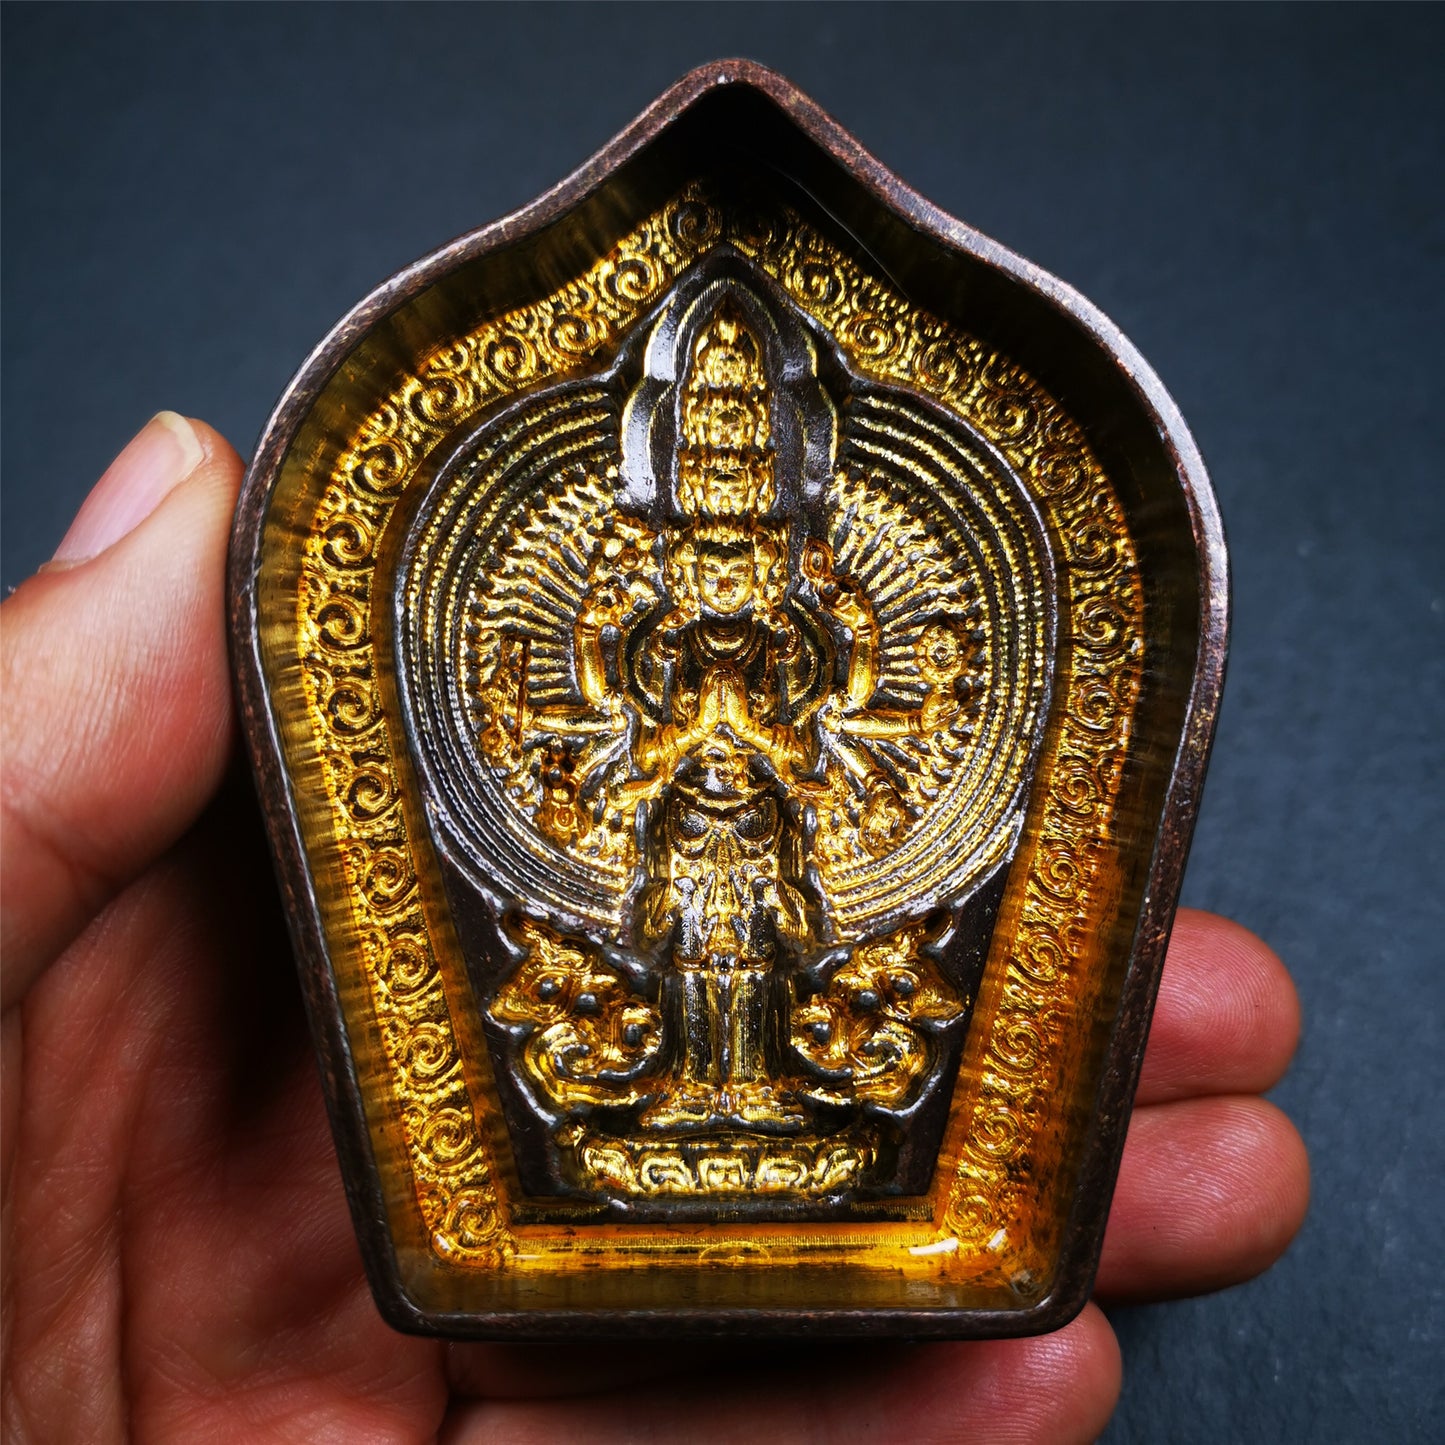 This unique 1000 Armes Avalokitesvara Tsa-Tsa buddha statue mold is made by Tibetan craftsmen in Hepo Township, Baiyu County. With this exquisite mold, you can use clay to make your own Buddha statue as a decoration or consecration. The statue that you make from your moulds can be left plain or painted.